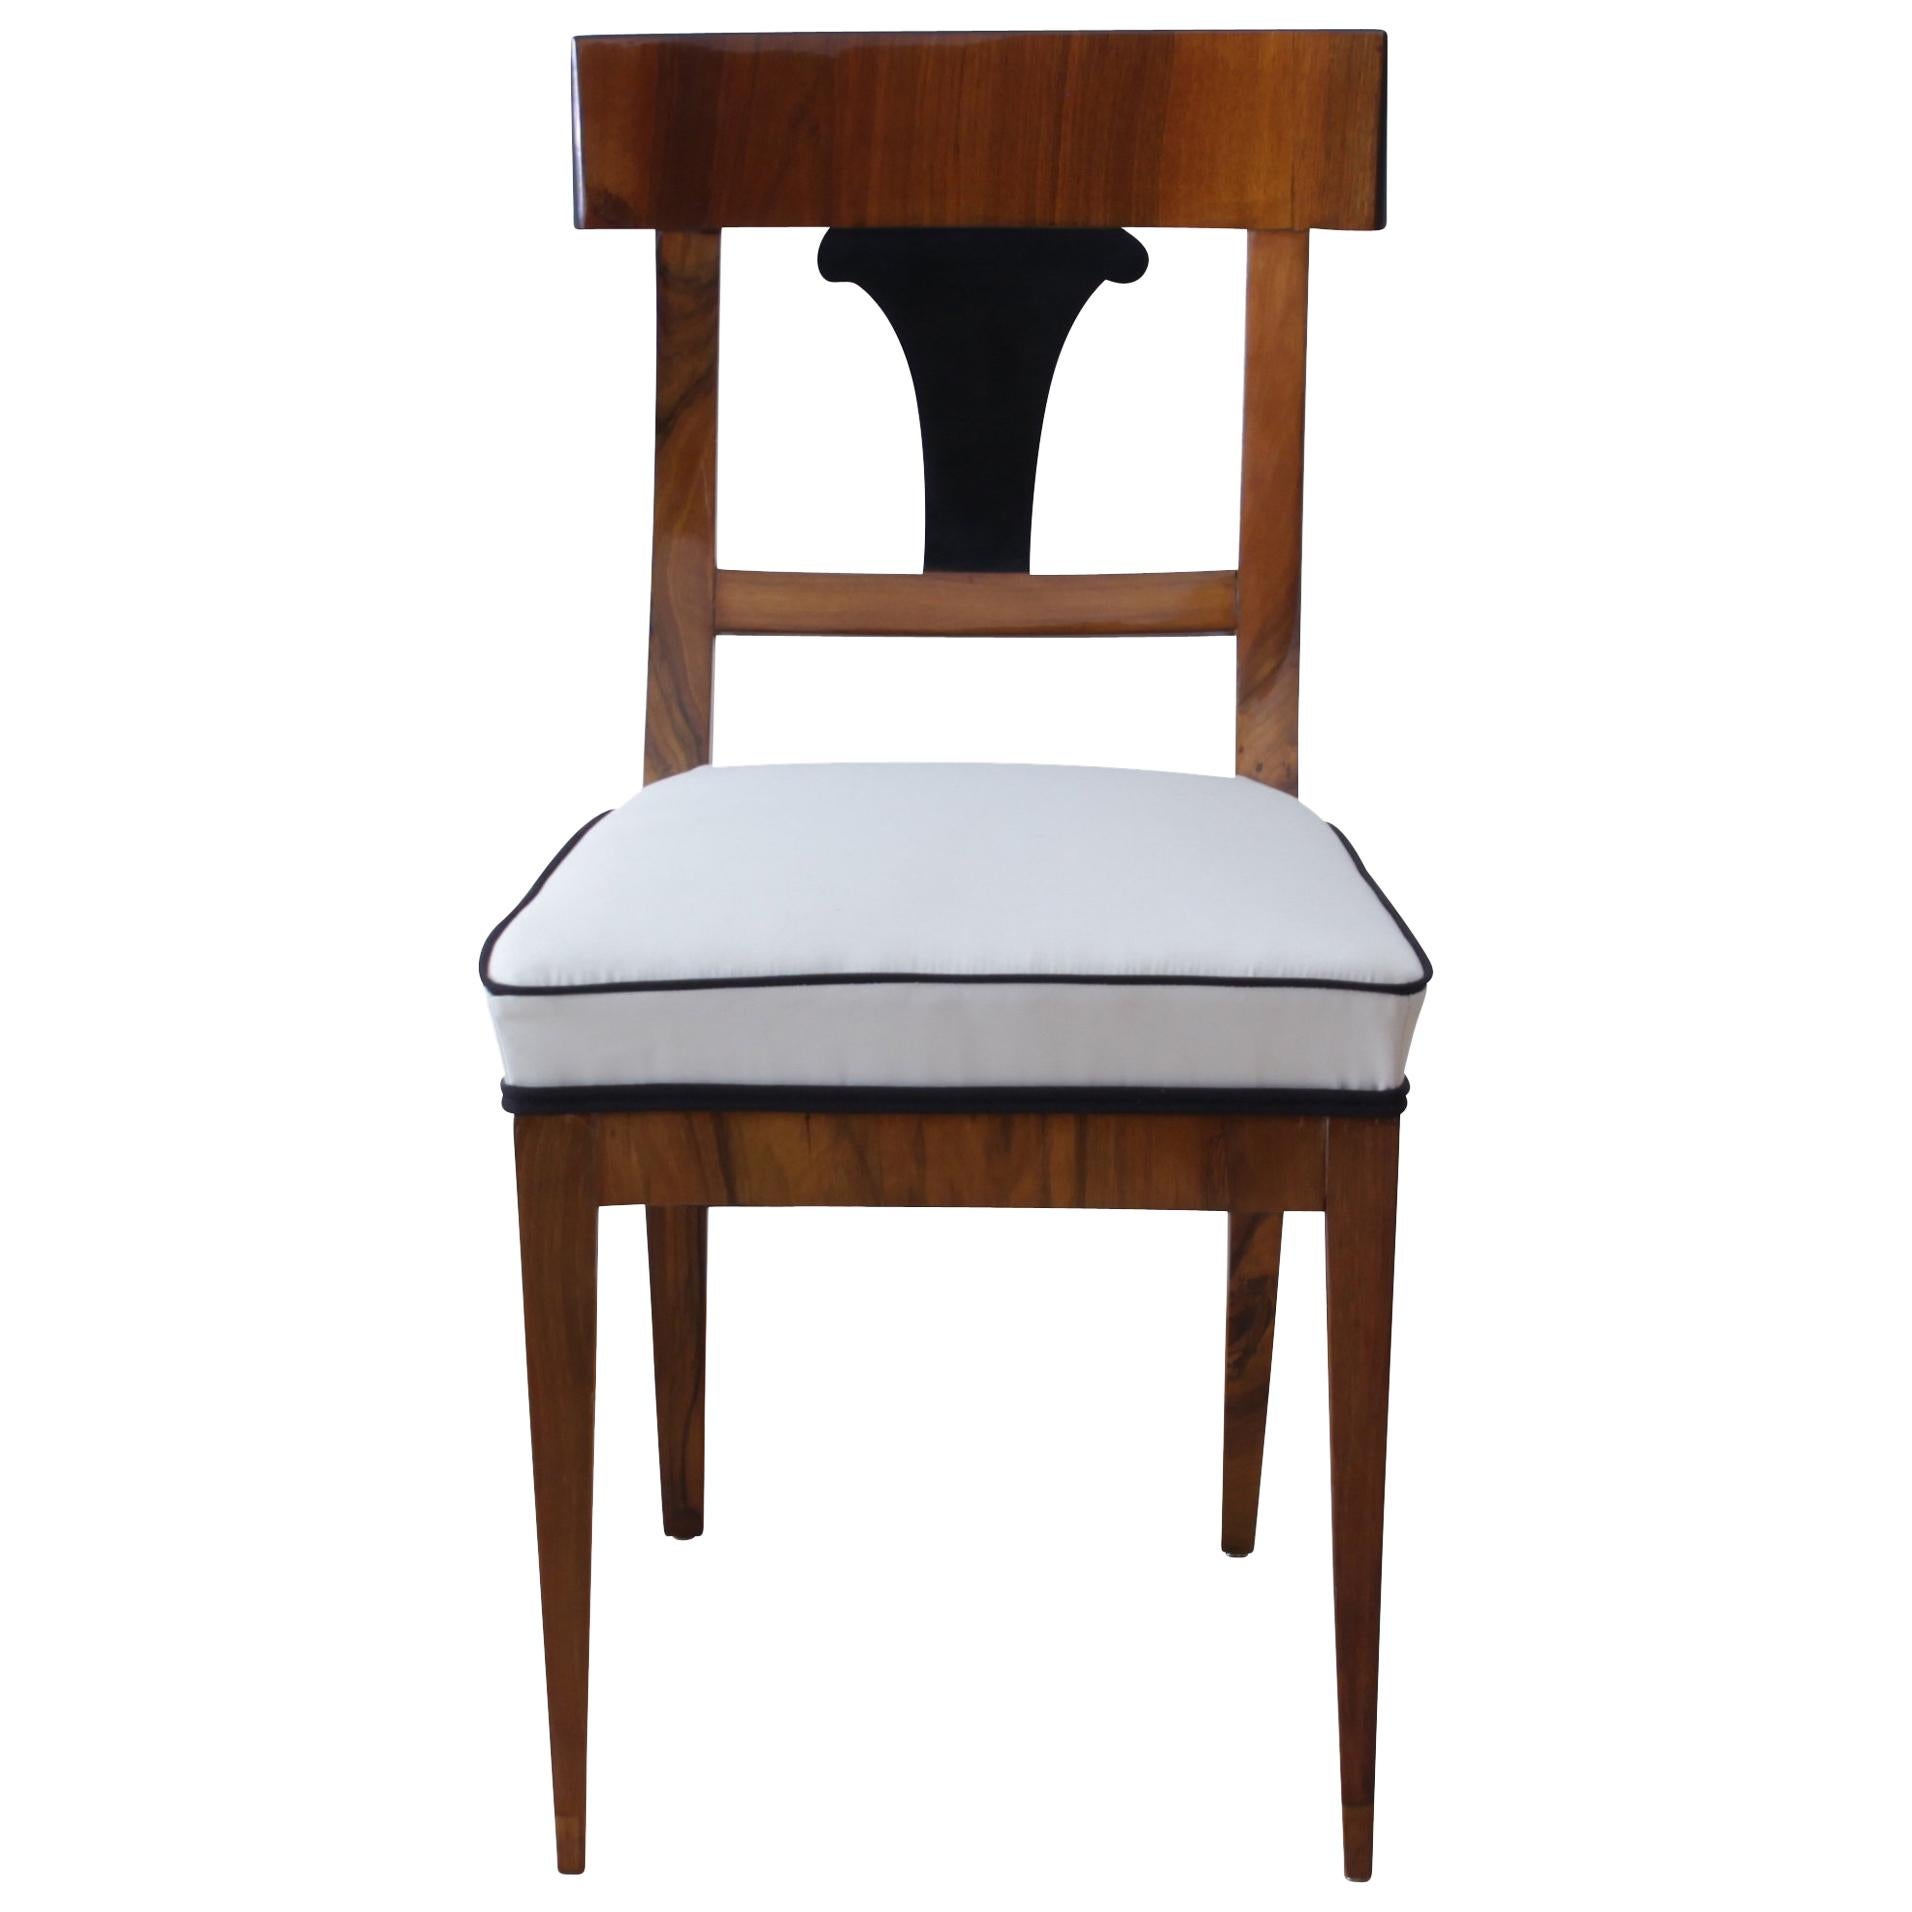 Very classic, early Biedermeier chair made of walnut solid wood and book-matched walnut veneer on the back rest. The back decor is ebonized wood.

While the front legs are running conical to the floor, the rear legs are elegantly curved to the